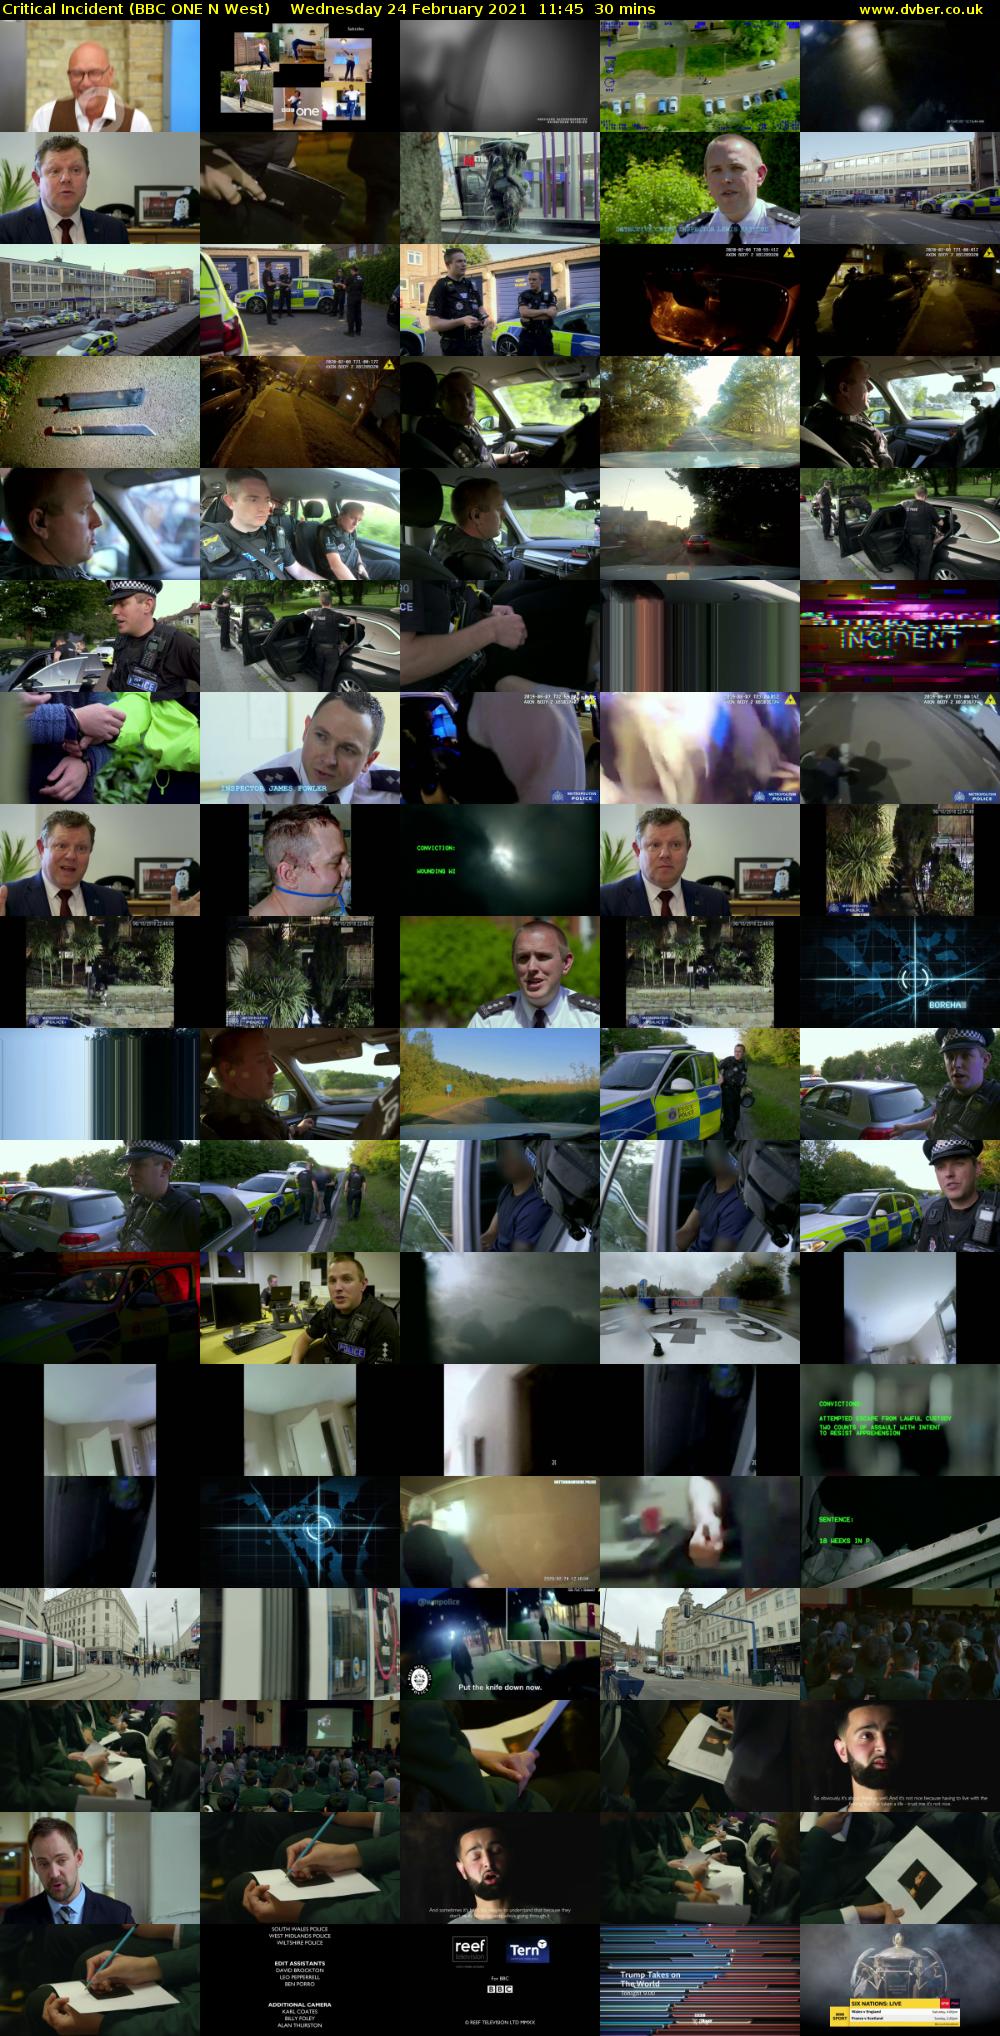 Critical Incident (BBC ONE N West) Wednesday 24 February 2021 11:45 - 12:15